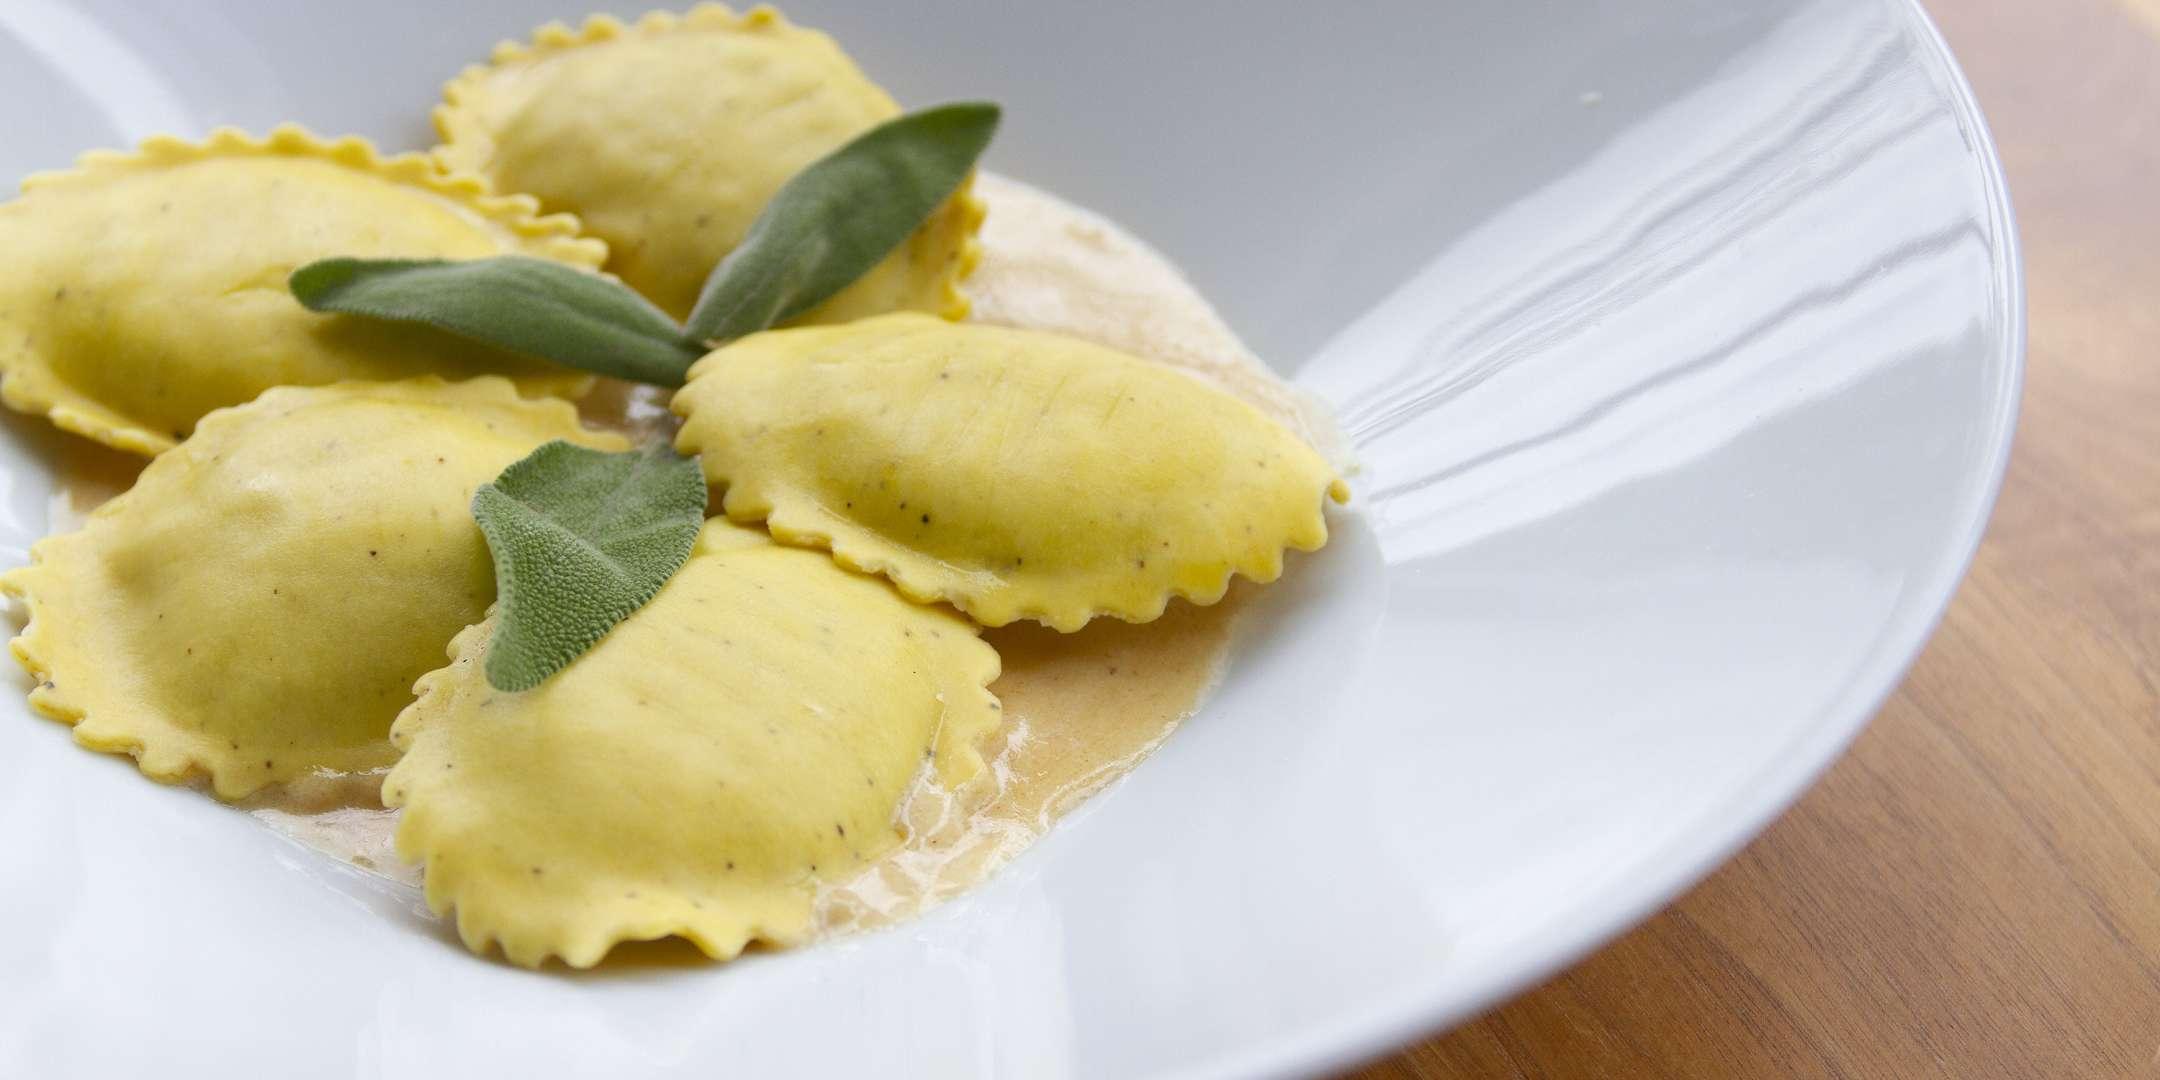 Basics of Handcrafted Ravioli - Cooking Class by Cozymeal™